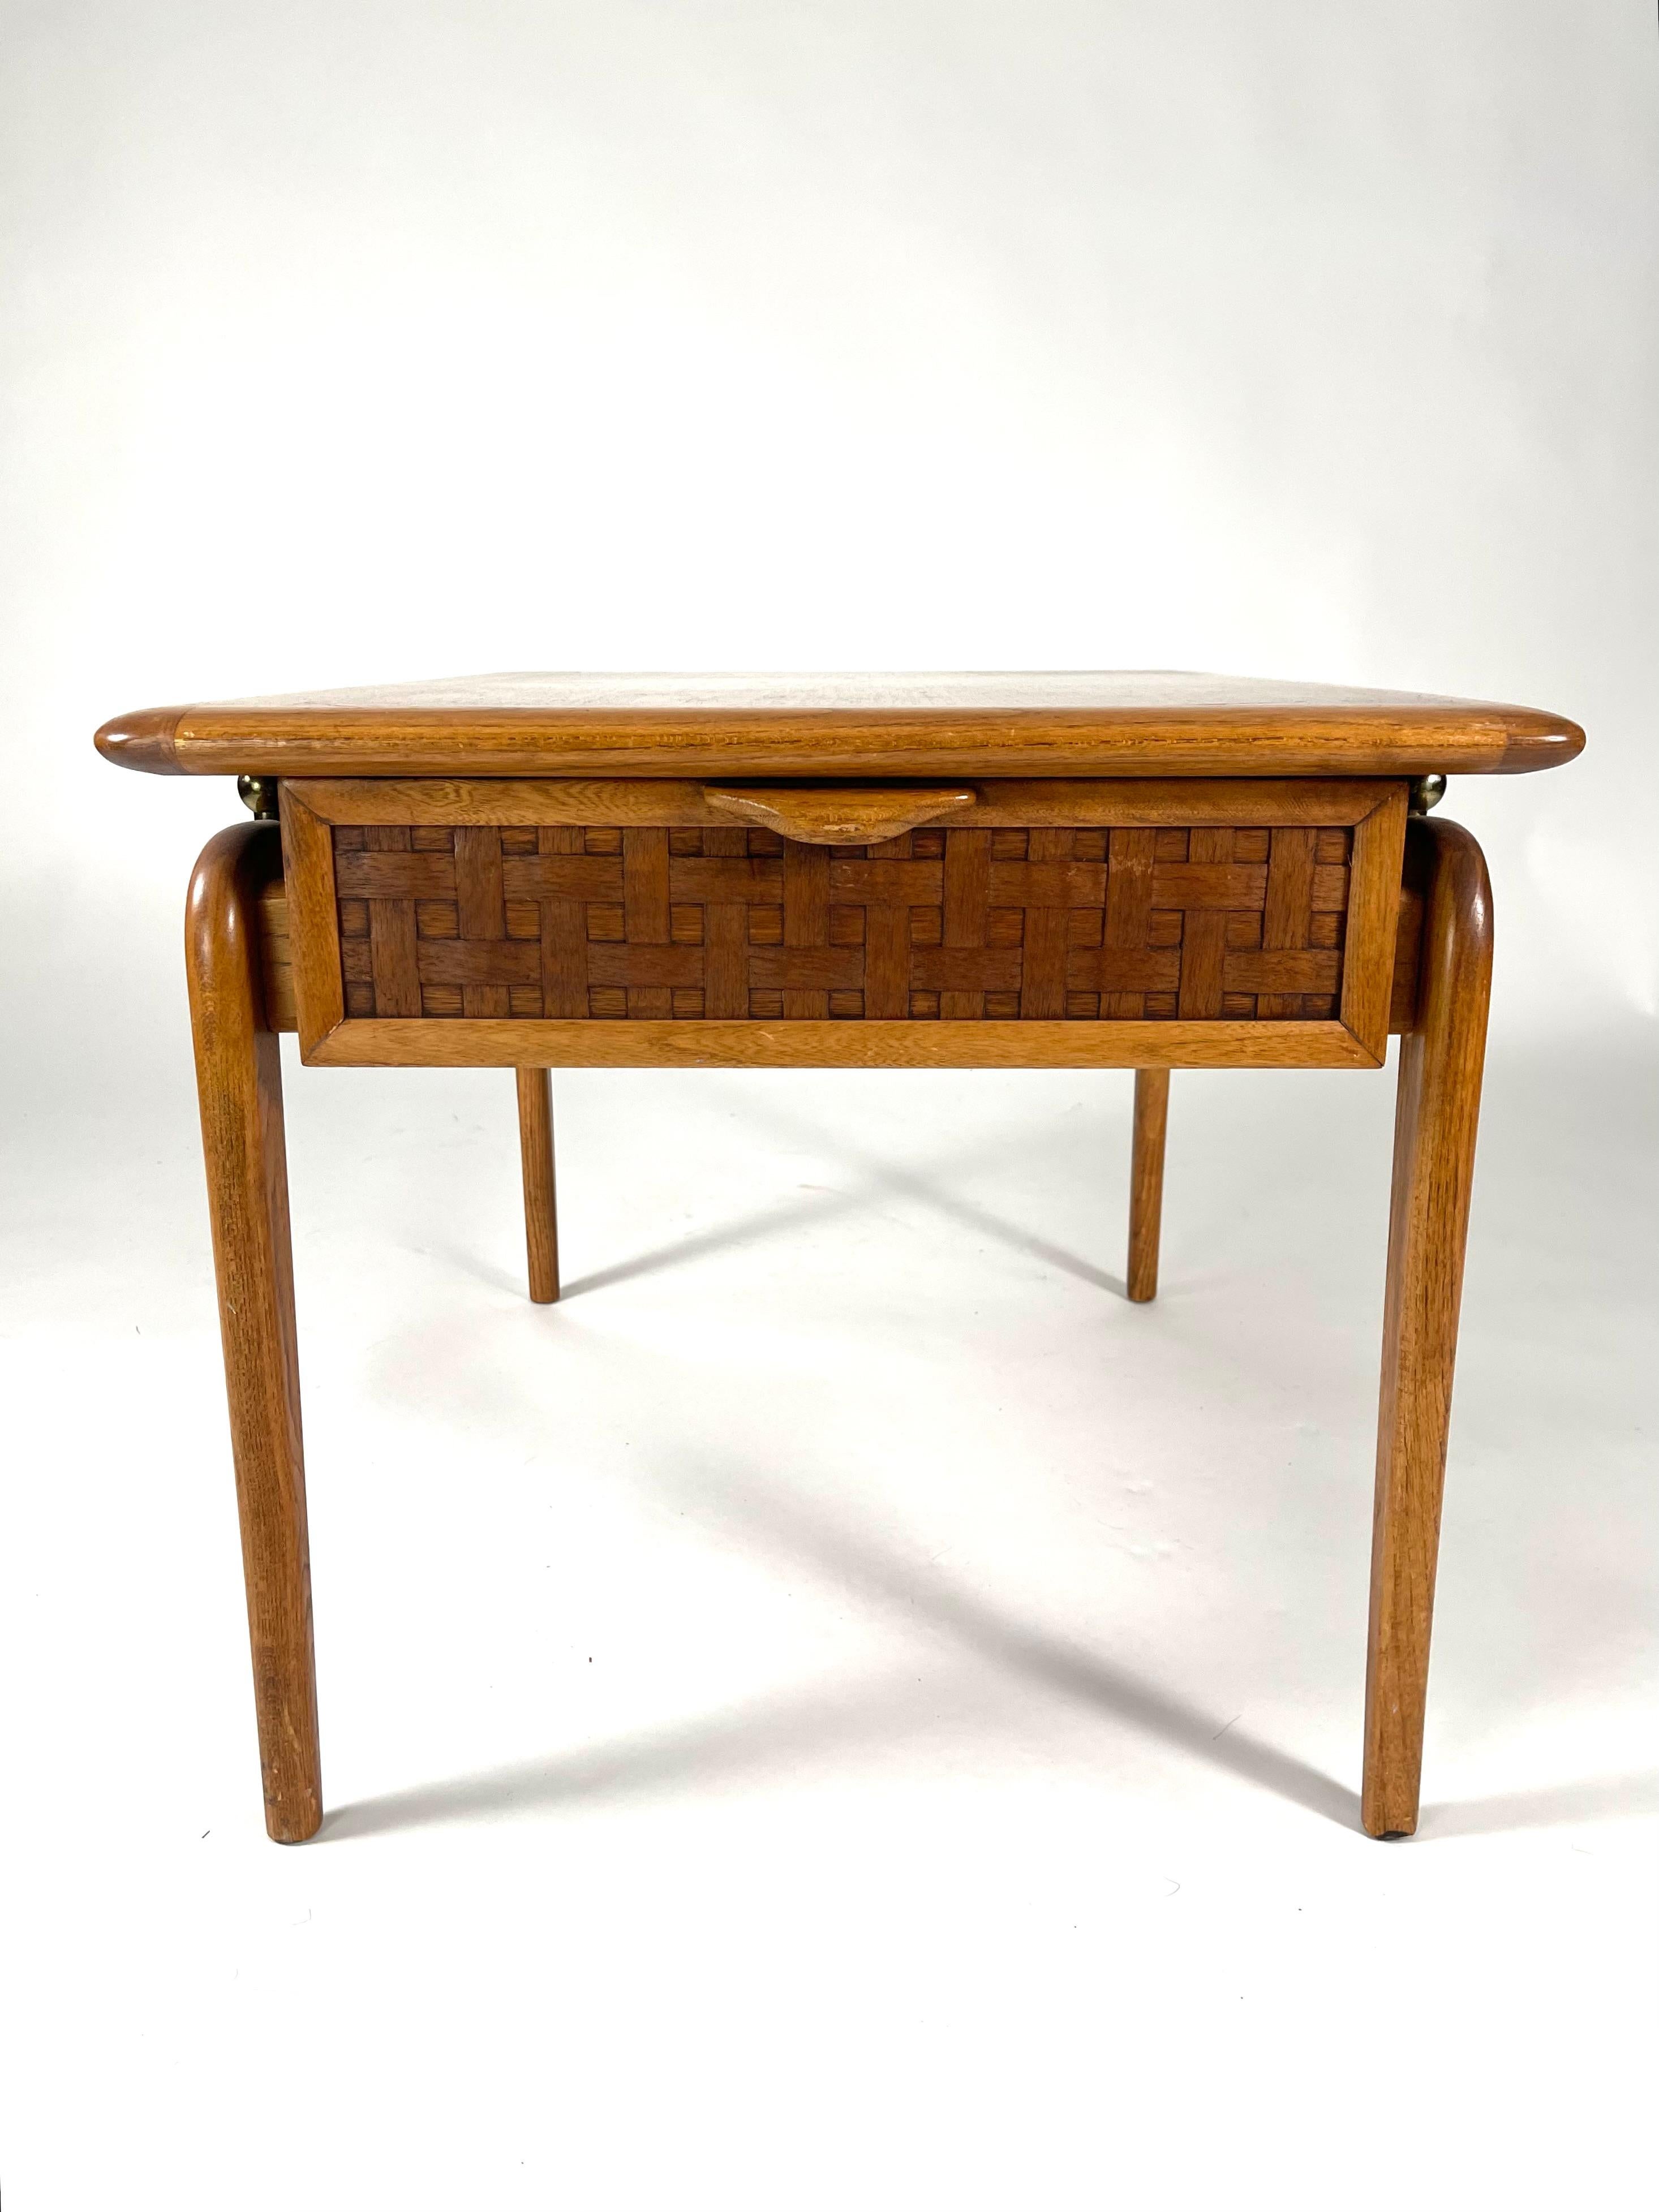 A  pair of well made, mid-century modern end tables or night tables by the Lane Furniture Company (Virginia), the rectangular tops in light mahogany and edged with oak or ash, the drawer fronts decorated with a carved basket weave pattern. The tops